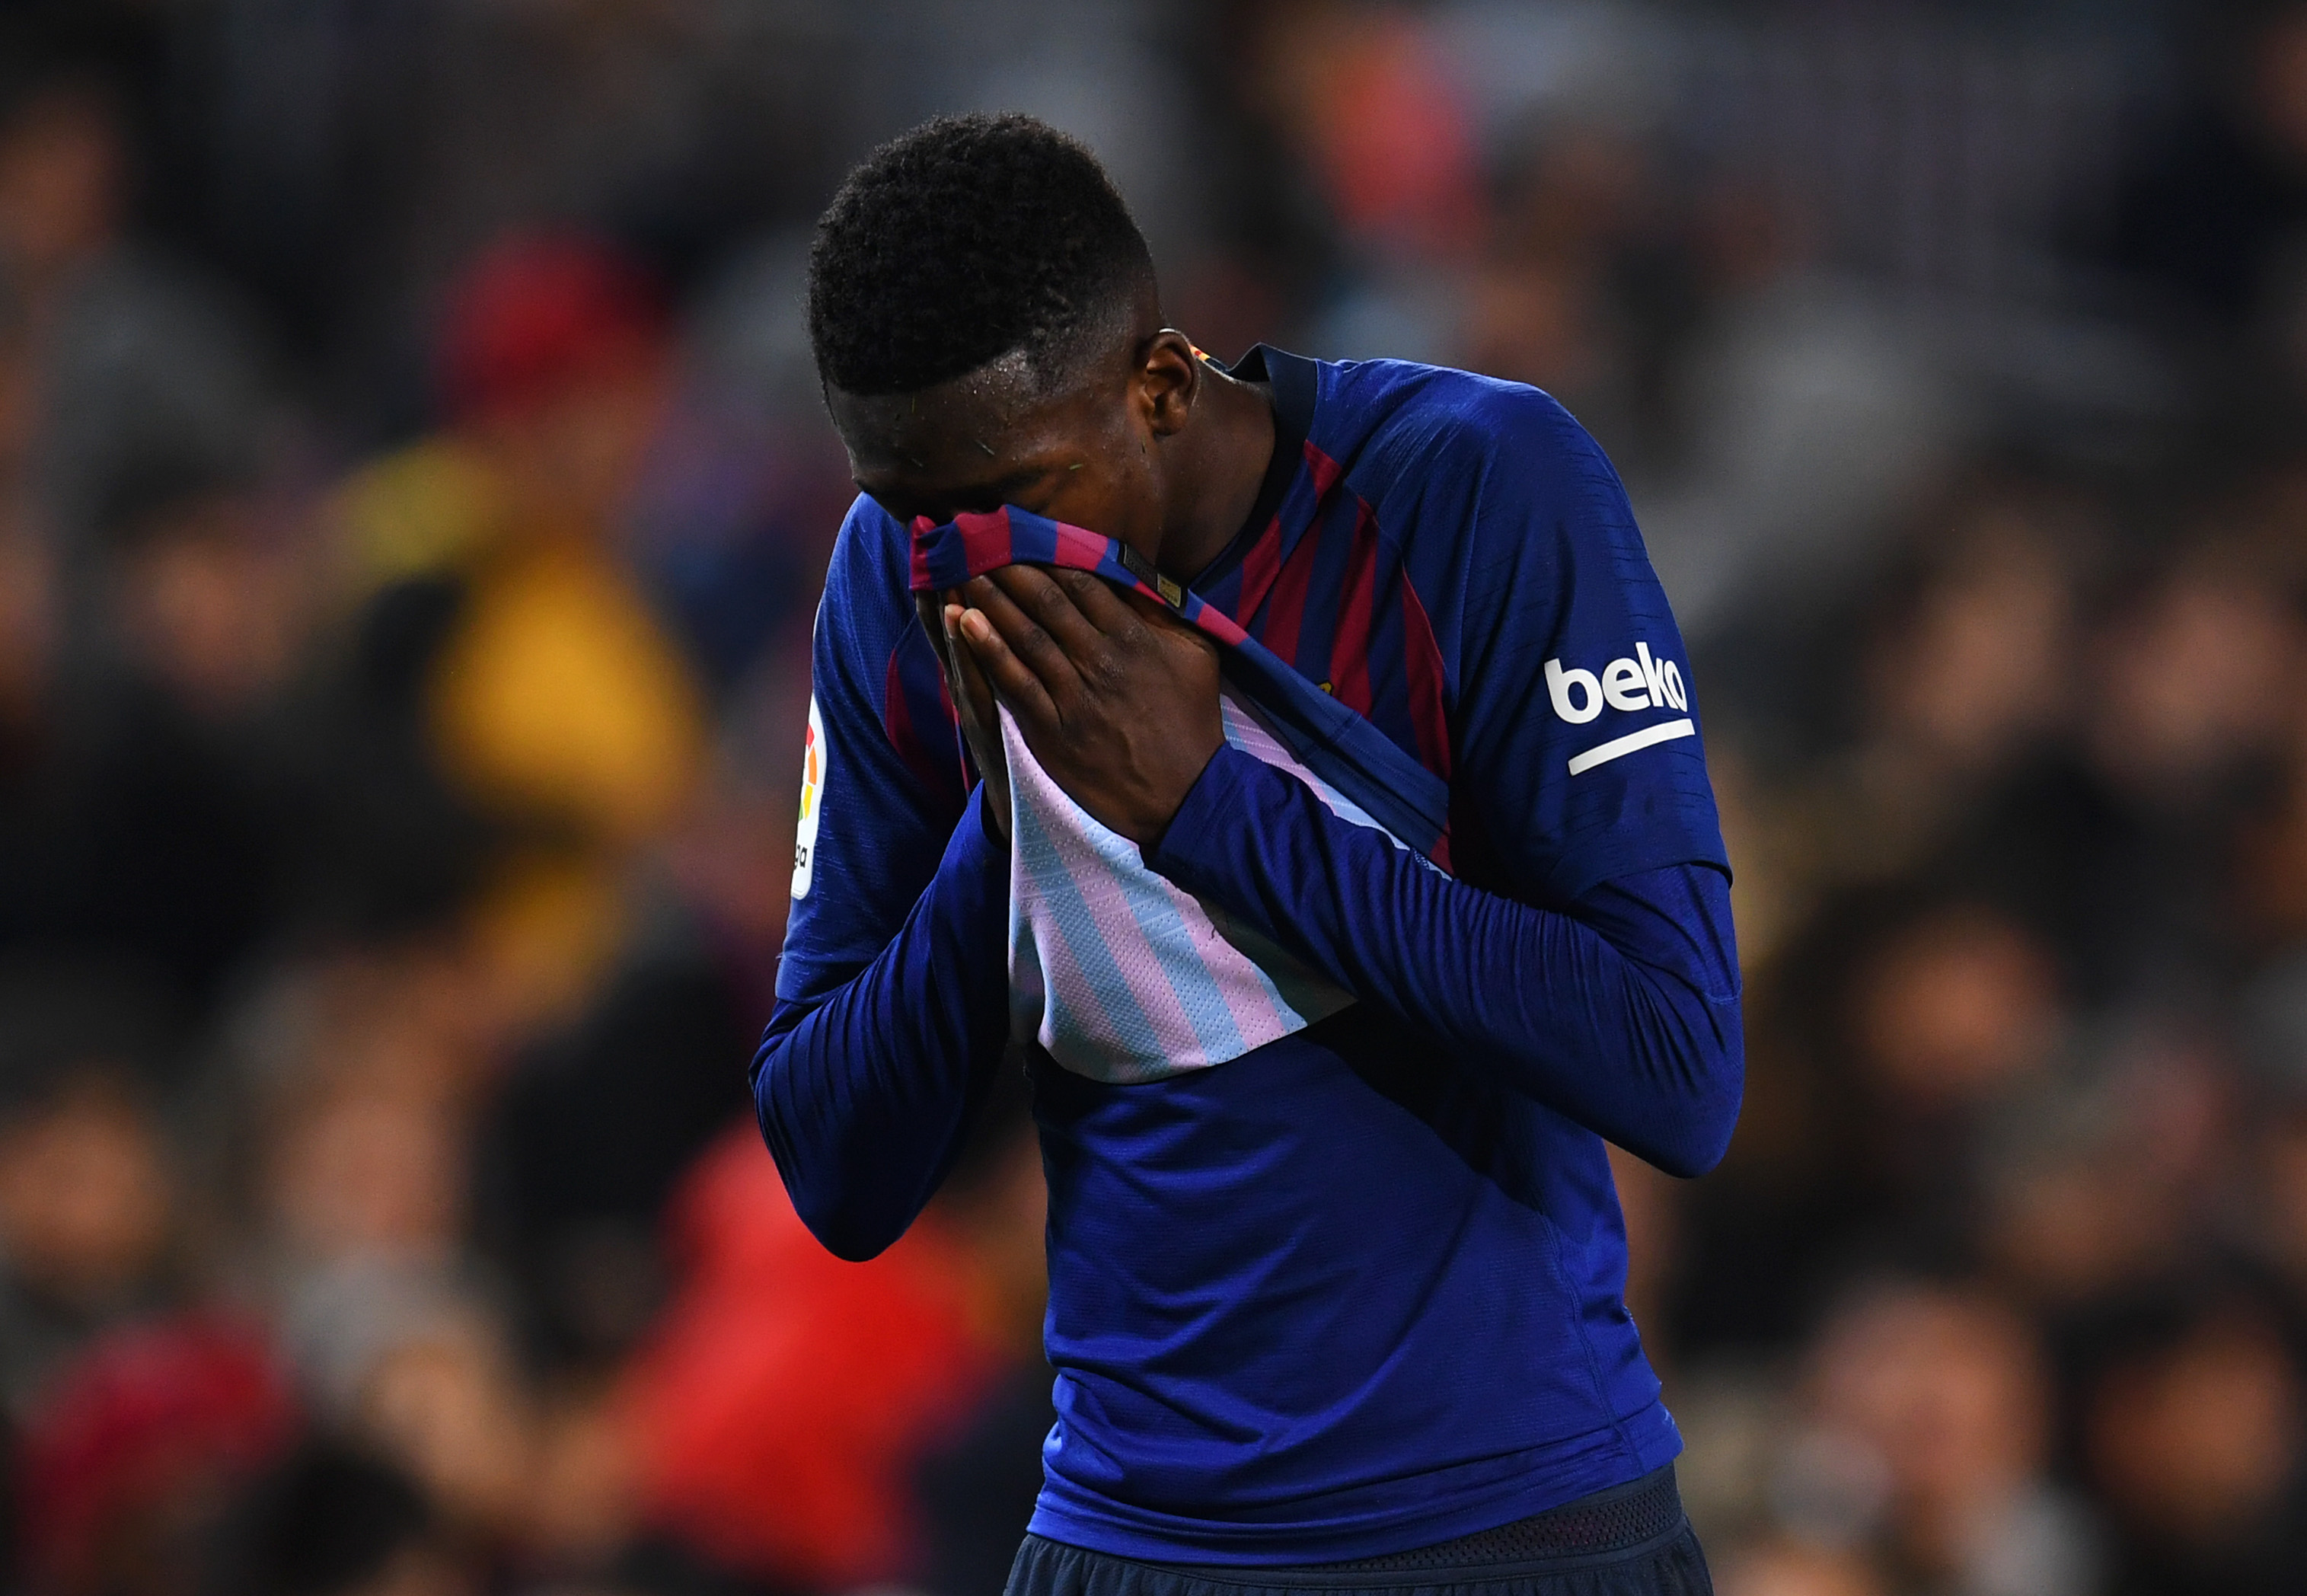 BARCELONA, SPAIN - JANUARY 20:  Ousmane Dembele of Barcelona reacts during the La Liga match between FC Barcelona and CD Leganes at Camp Nou on January 20, 2019 in Barcelona, Spain. (Photo by David Ramos/Getty Images)